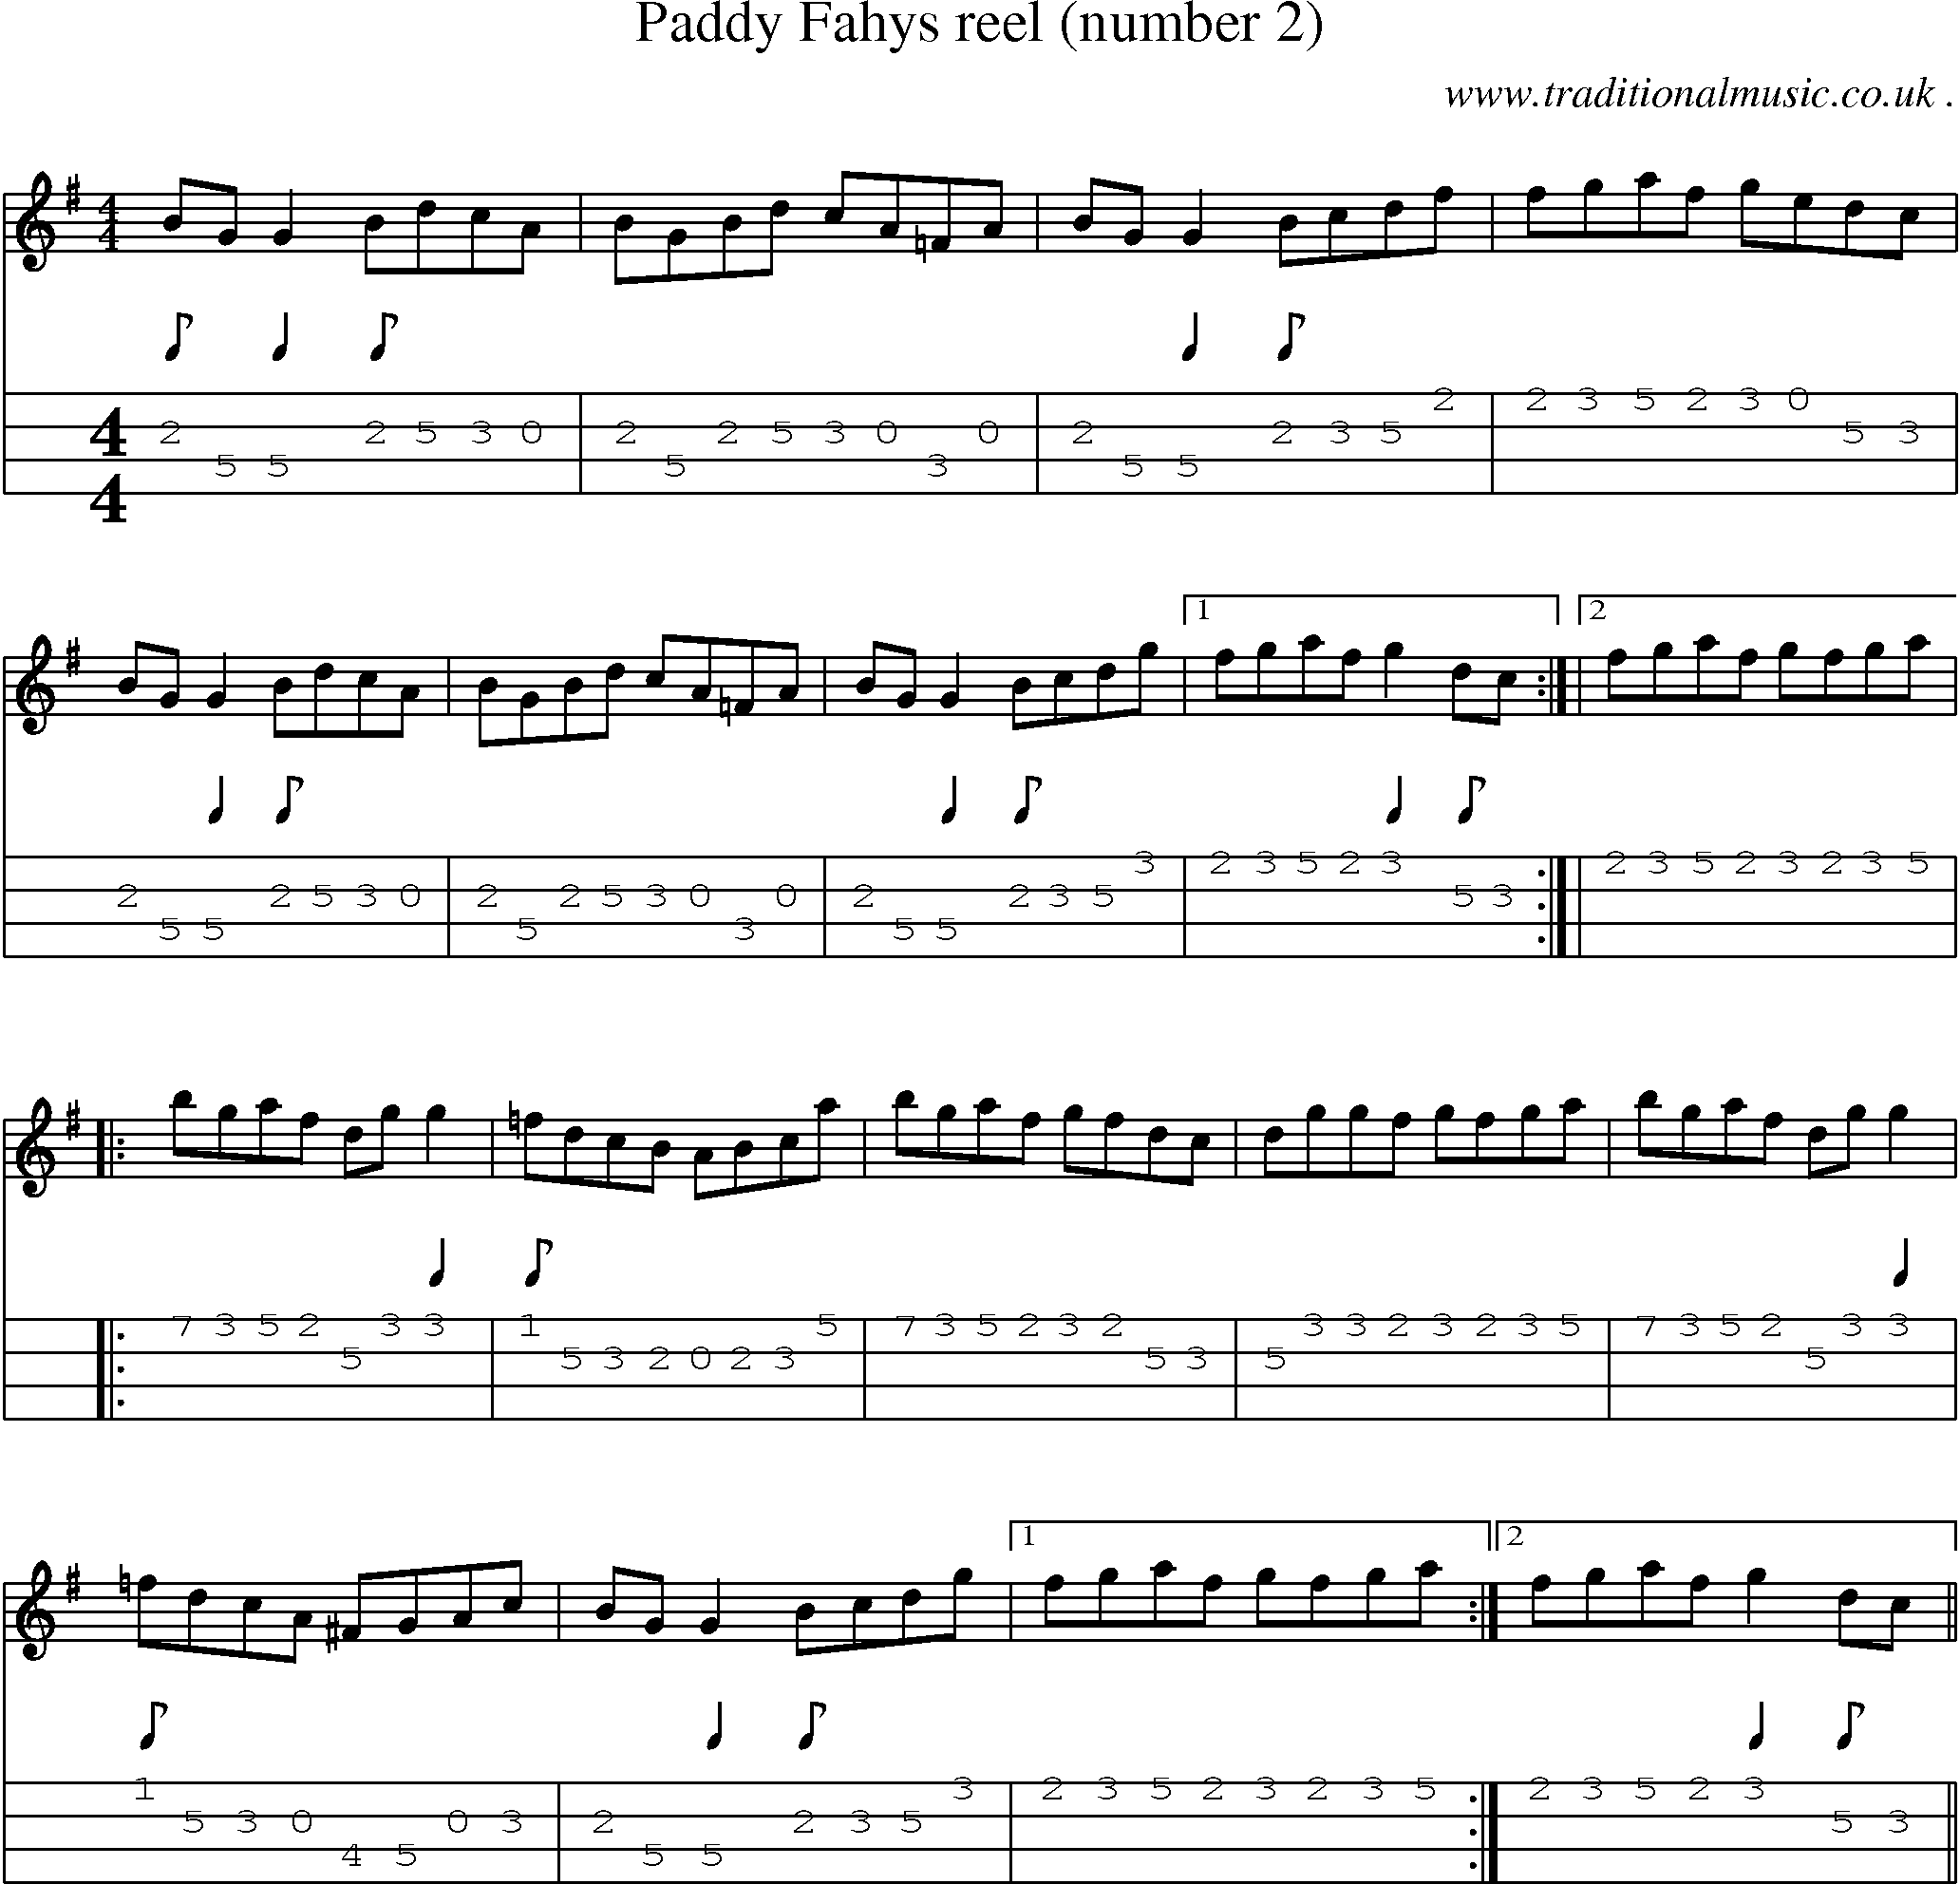 Sheet-Music and Mandolin Tabs for Paddy Fahys Reel (number 2)